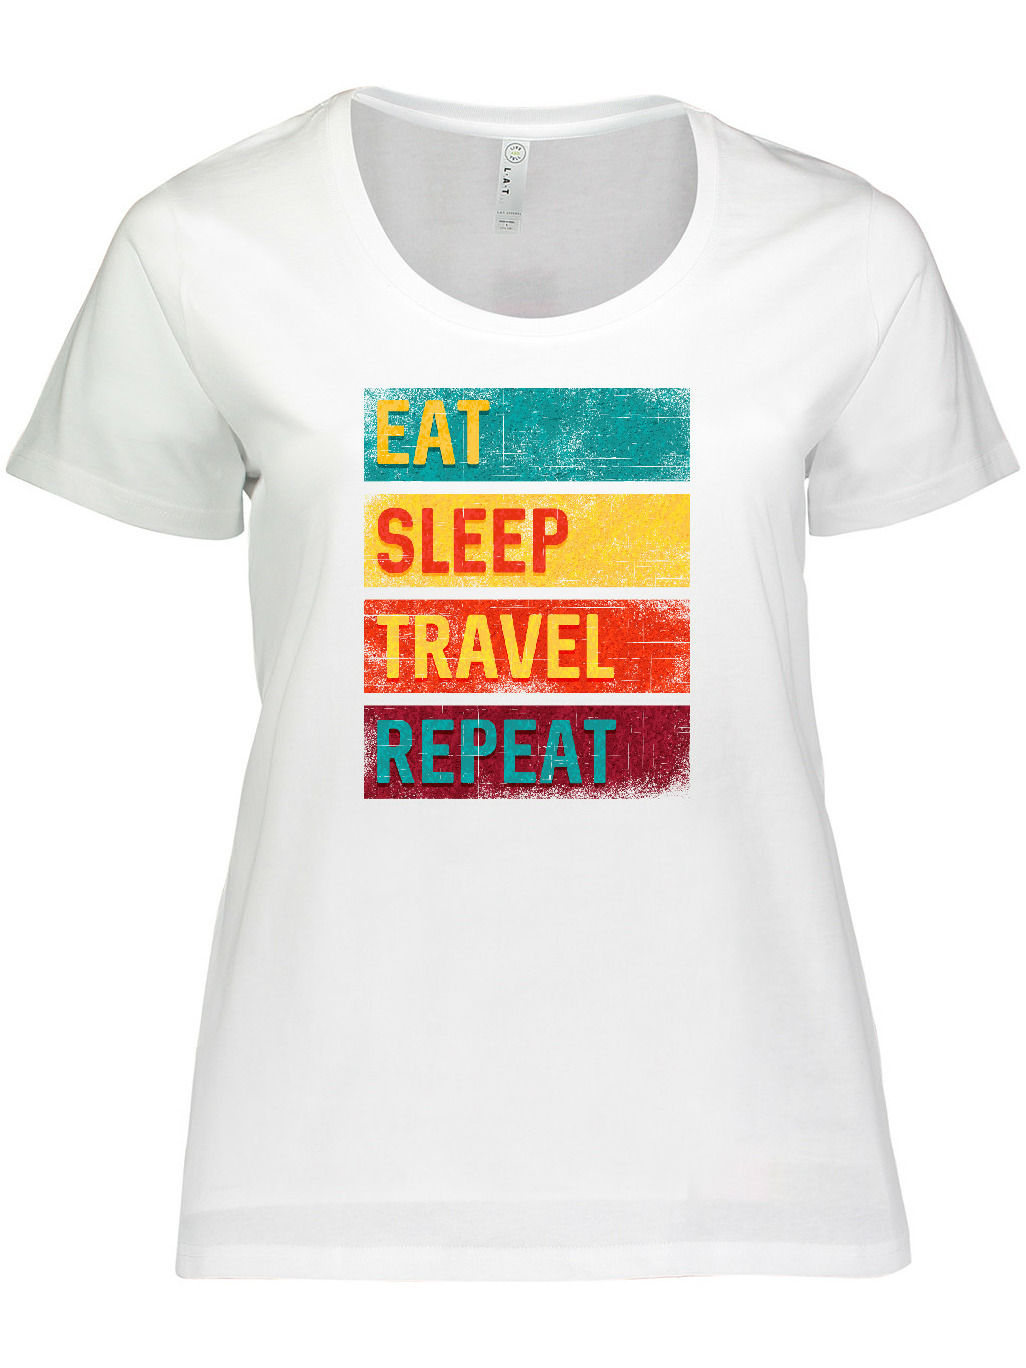 Inktastic Vacation Eat Sleep Travel Repeat Women's Plus Size T-Shirt - image 1 of 4